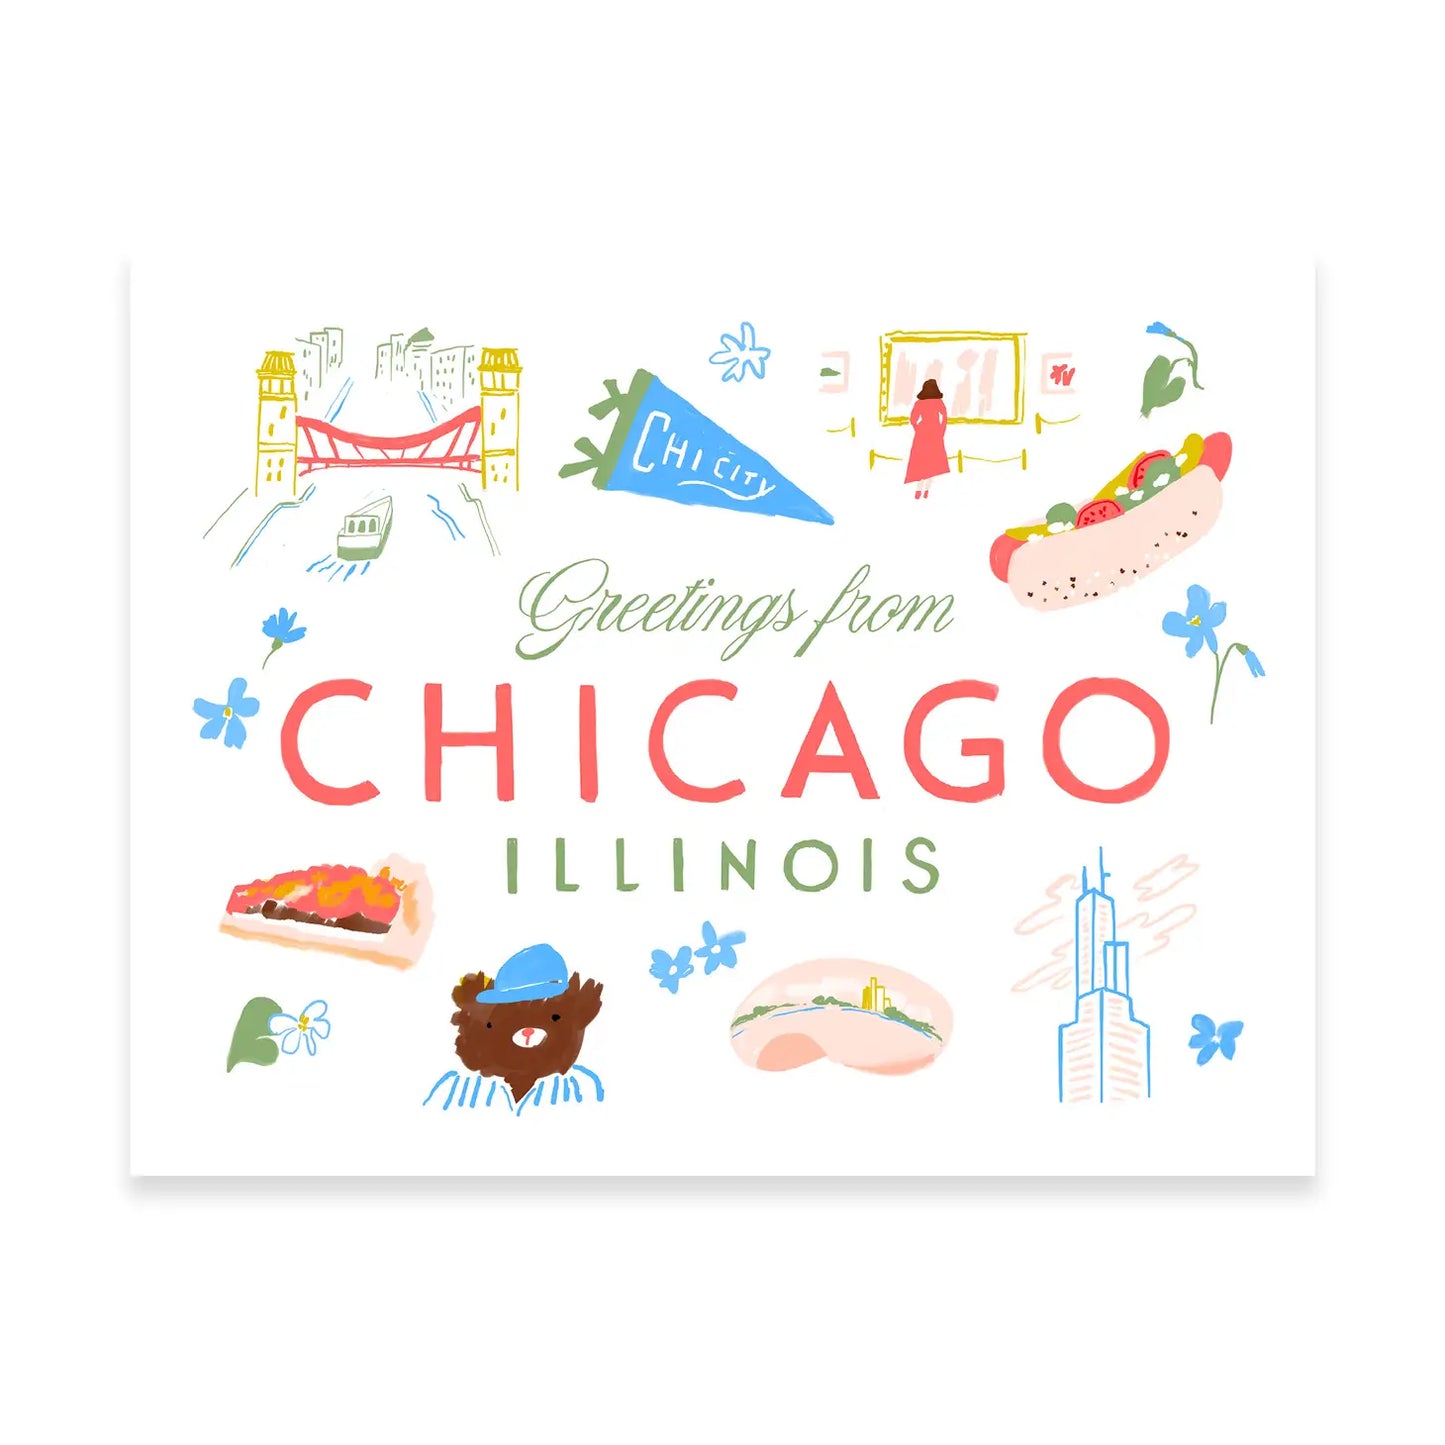 Greetings from Chicago Icons 8" x 10" Print